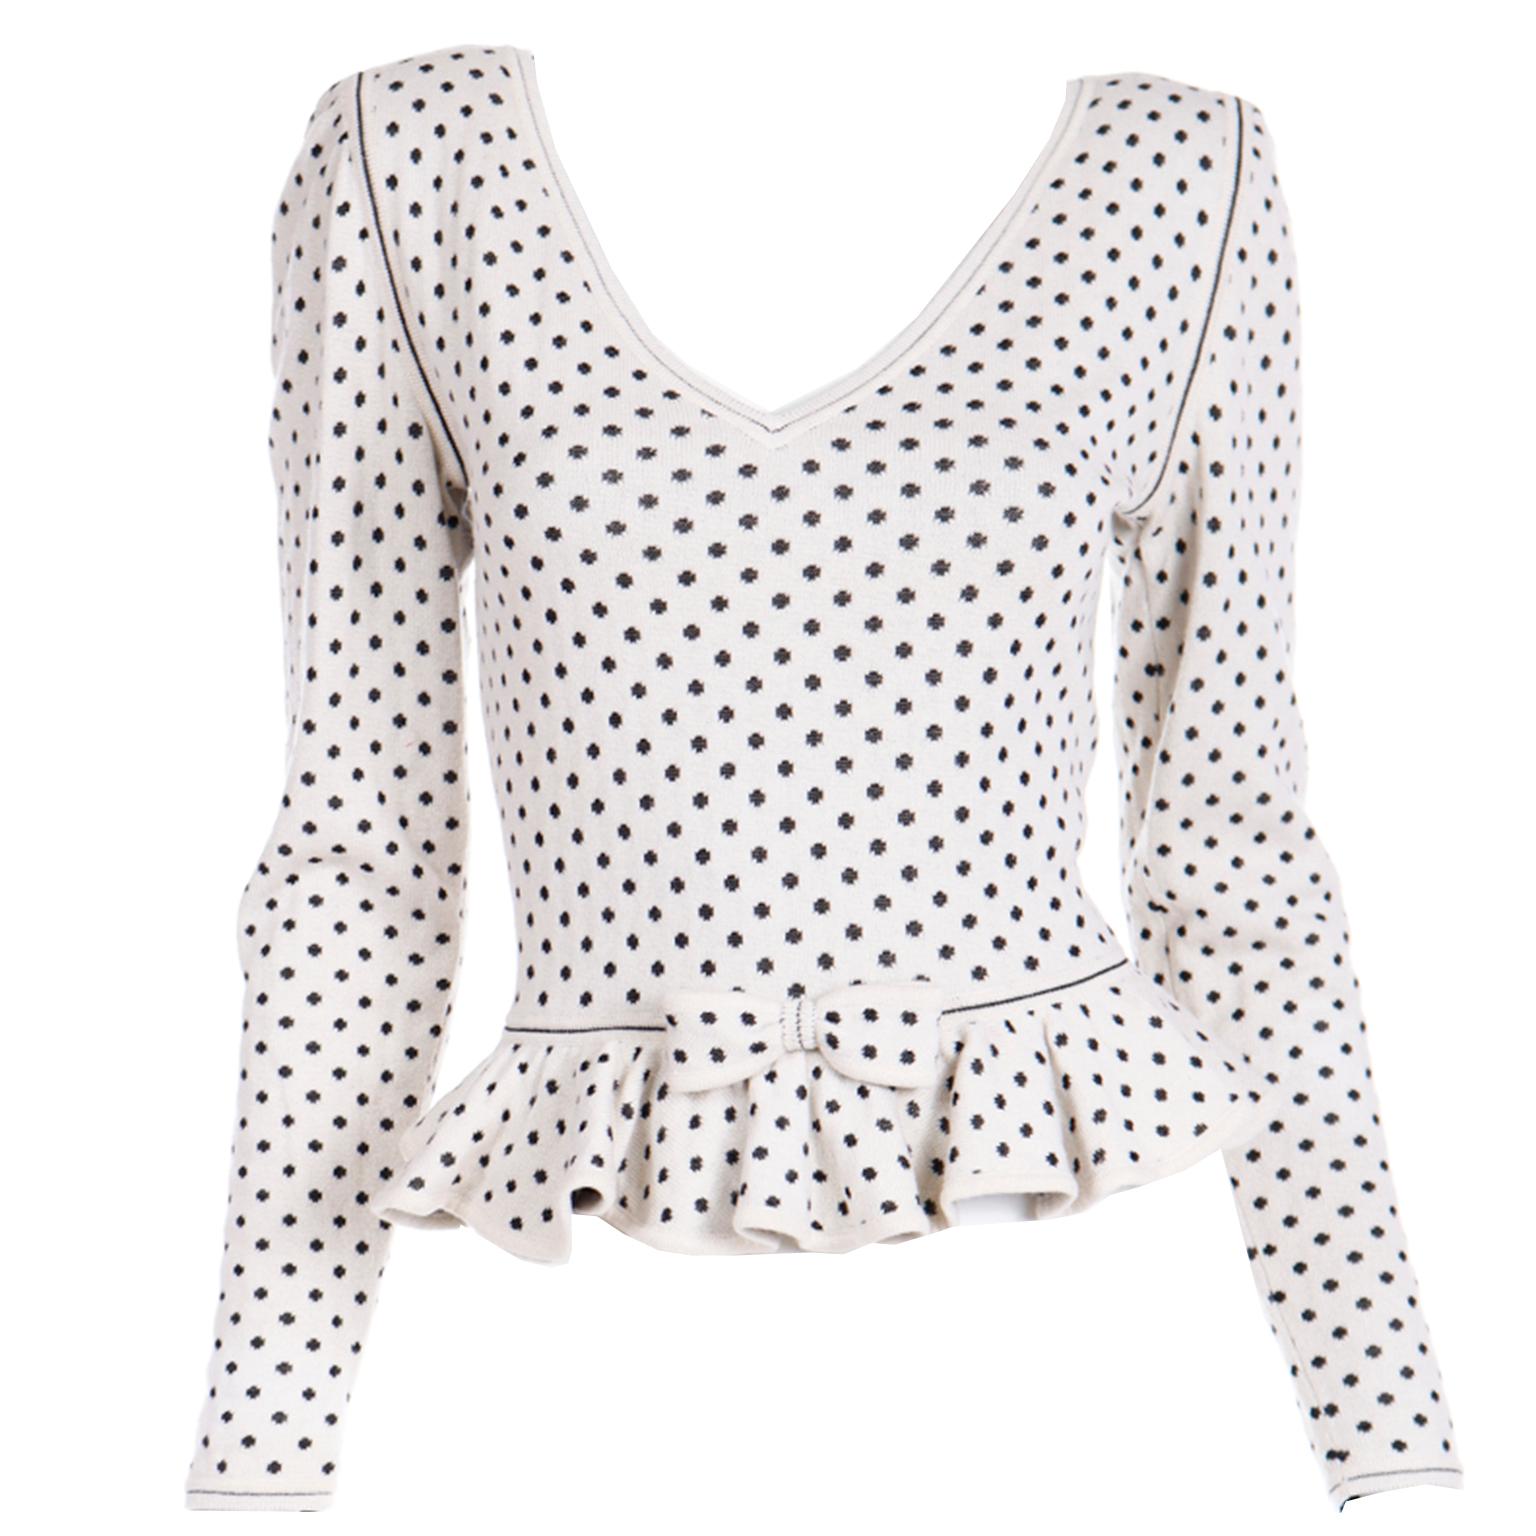 Ungaro Parallele Deadstock Vintage Polka Dot Bow Cashmere Silk Sweater Top For Sale 1